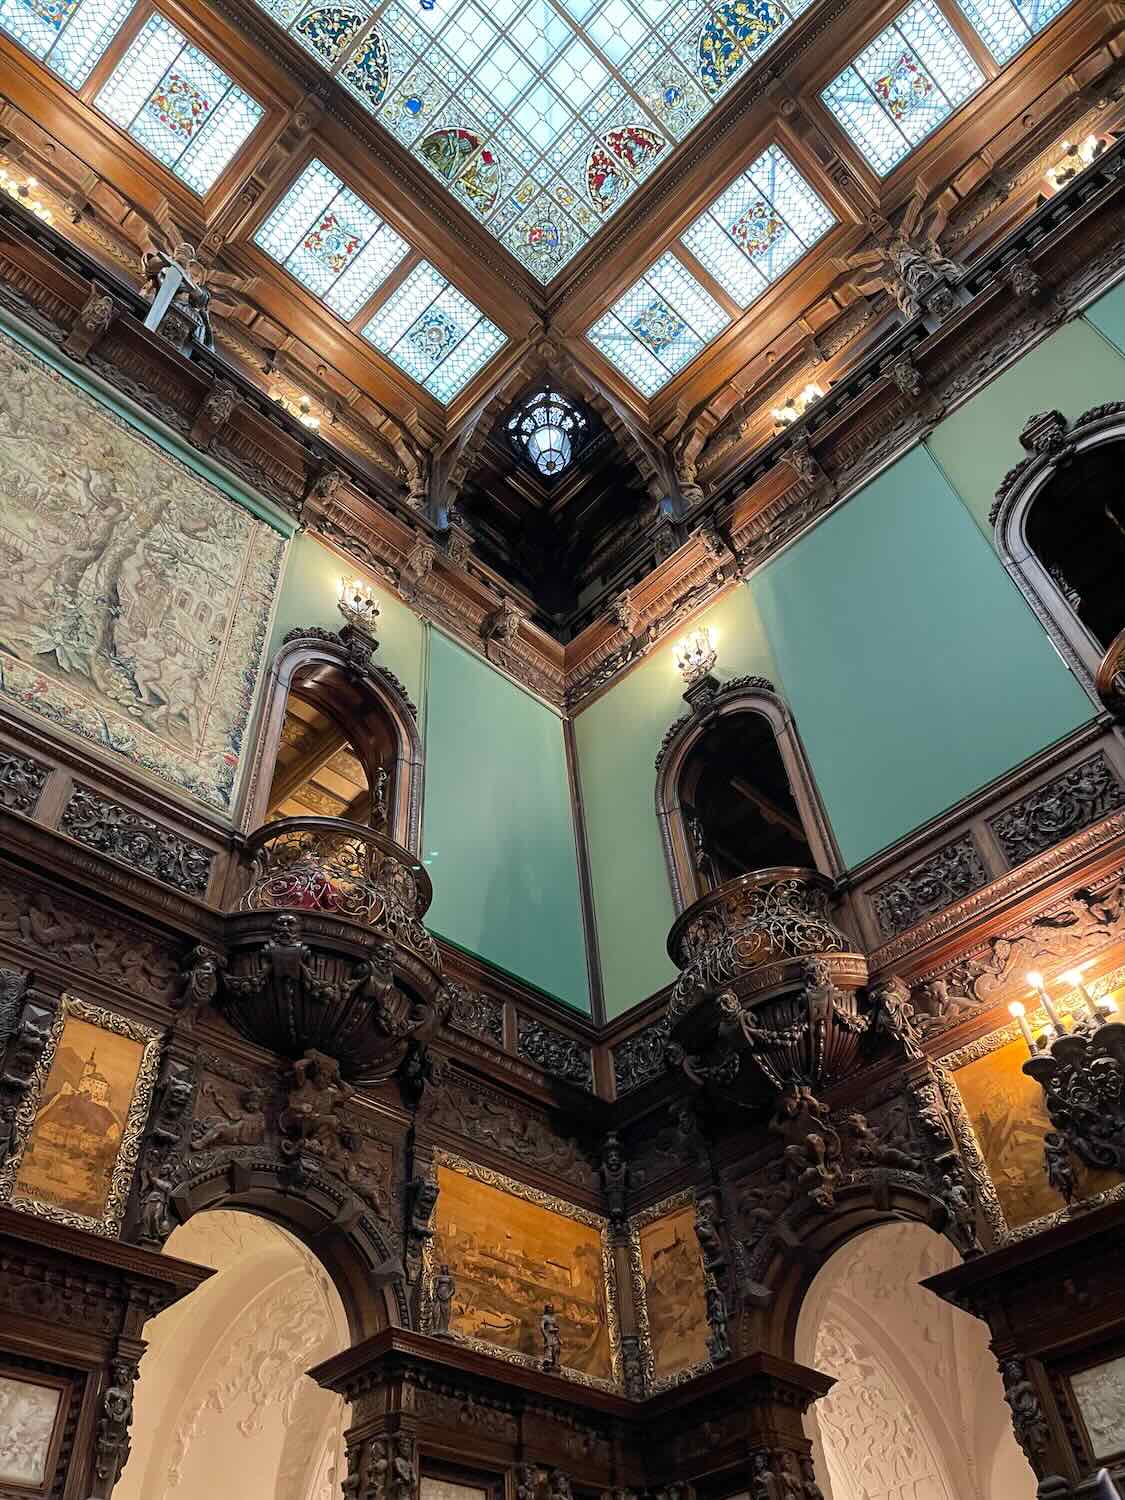 Looking up into the magnificent wooden ceiling of Peles Castle, with vibrant stained glass and intricate carvings, conveying the grandeur of Romanian royal architecture.